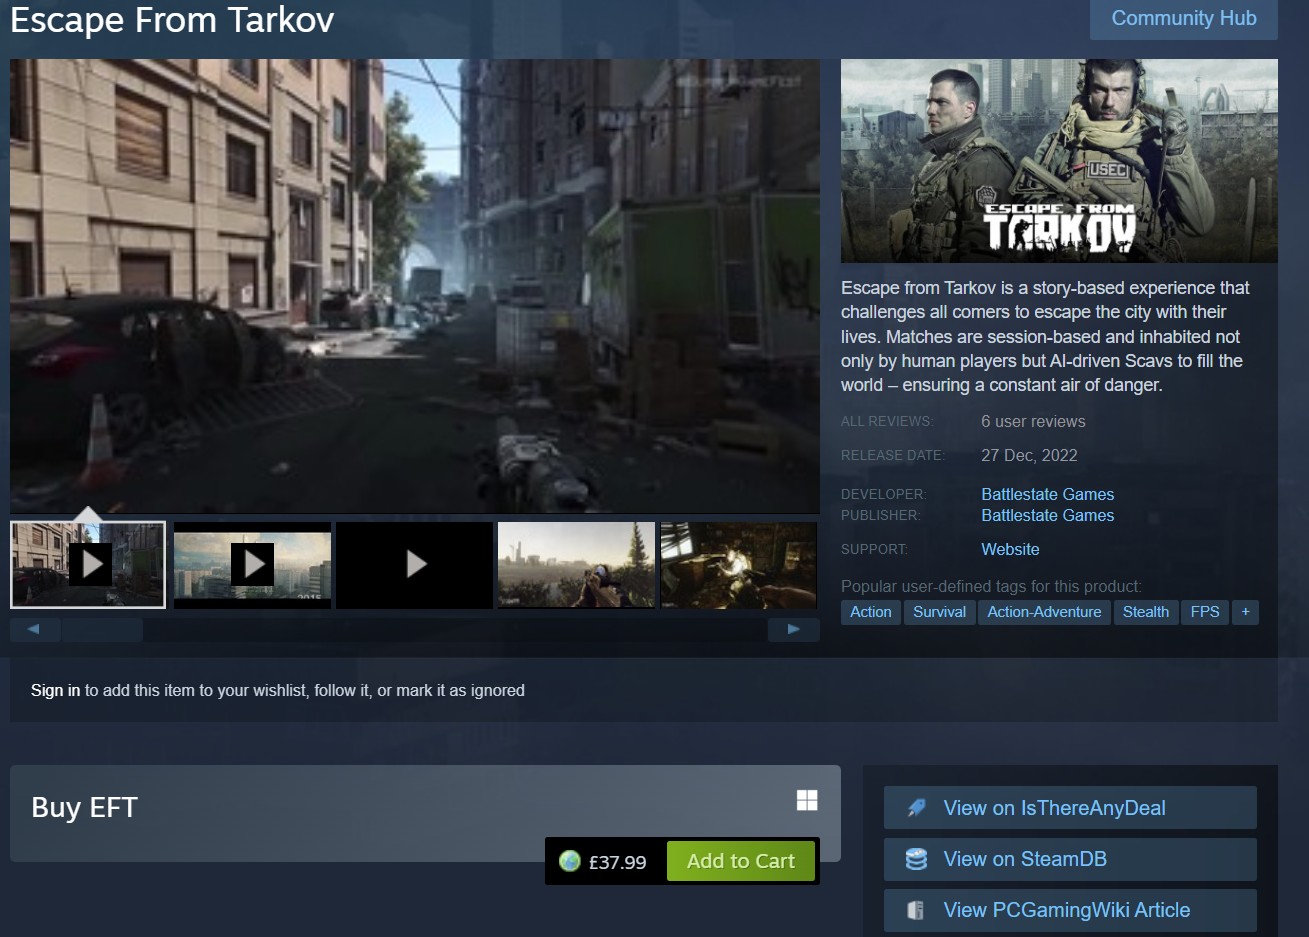 Don’t buy Escape from Tarkov on Steam, it’s a fake. A fake Escape from Tarkov Steam listing